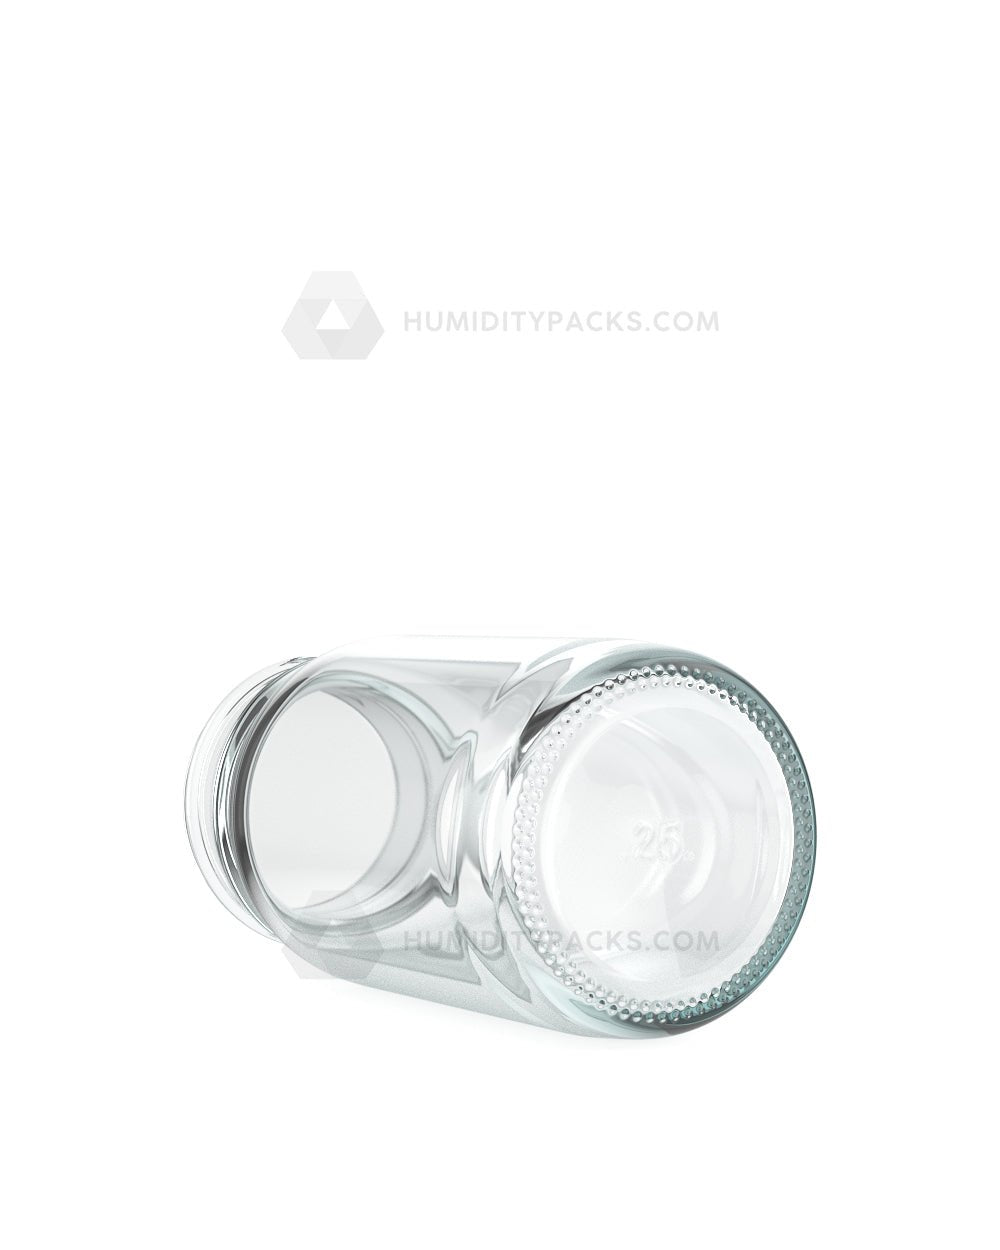 38mm Wide Mouth Straight Clear 2oz Glass Jar 160/Box Humidity Packs - 4